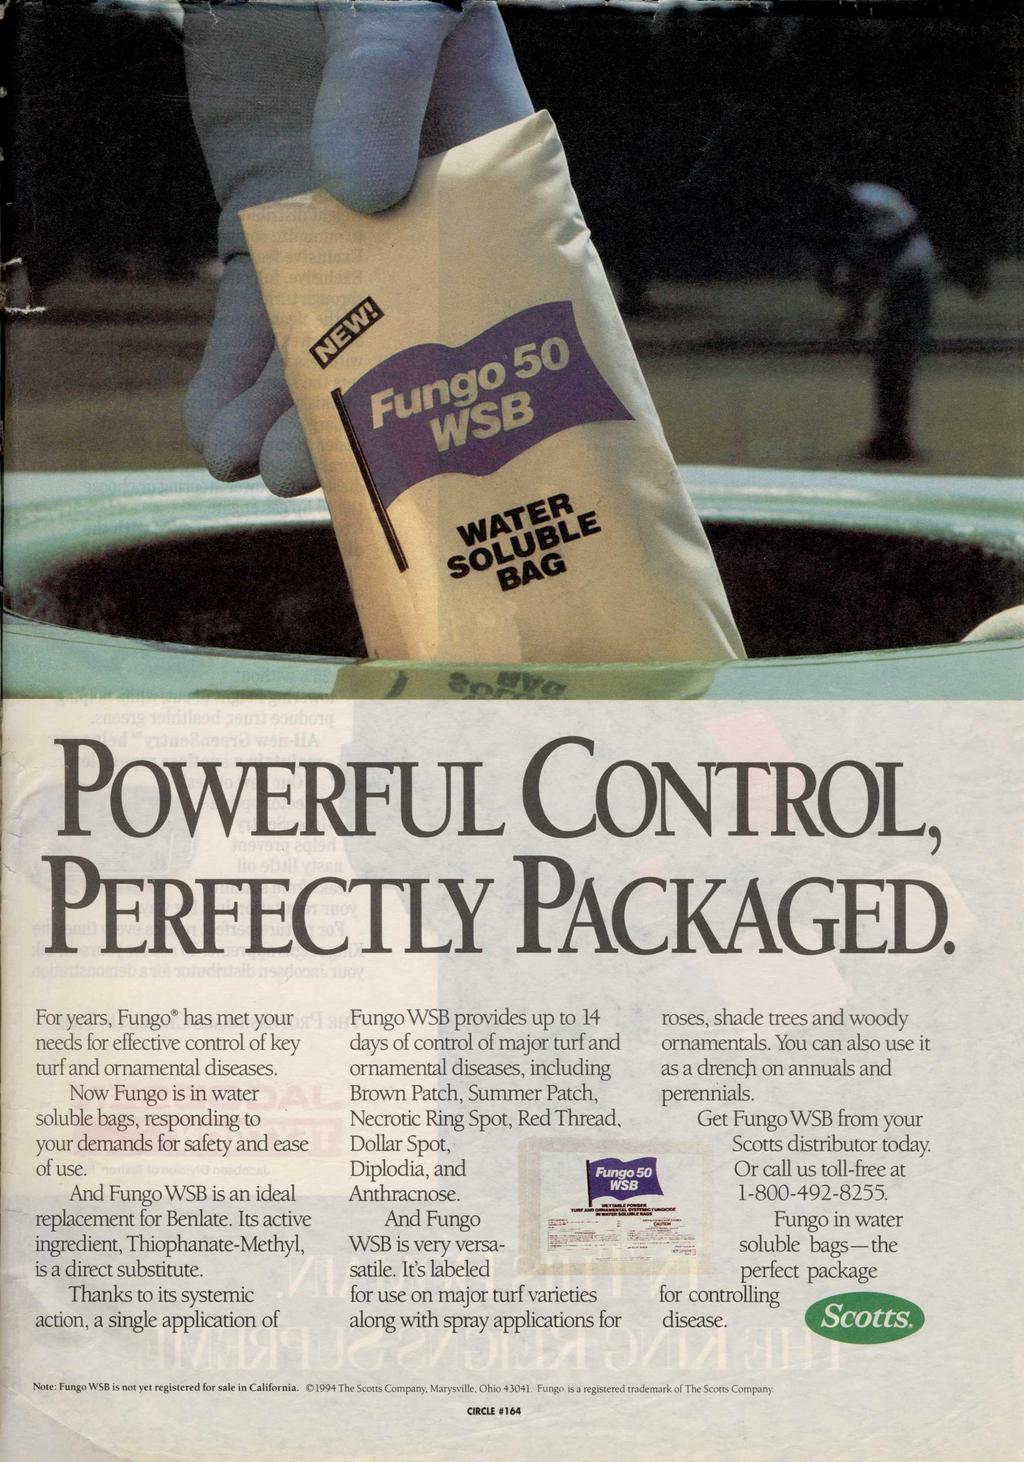 POWERFUL CONTROL, PERFECTLY PACKAGED. For years, Fungo has met your needs for effective control of key turf and ornamental diseases.